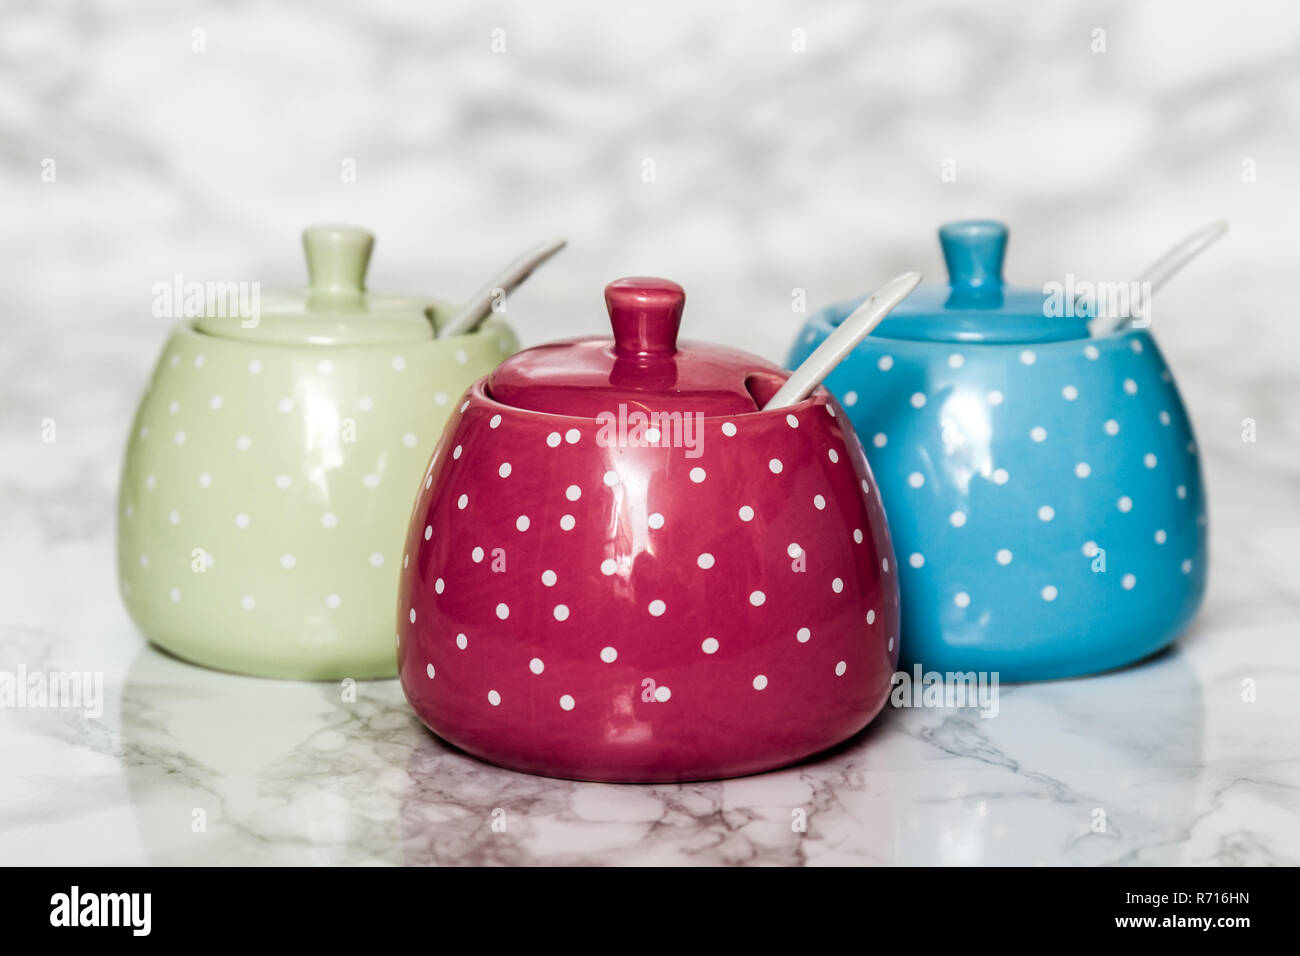 Cute Ceramic Storage Jars with Dots on White Stock Photo